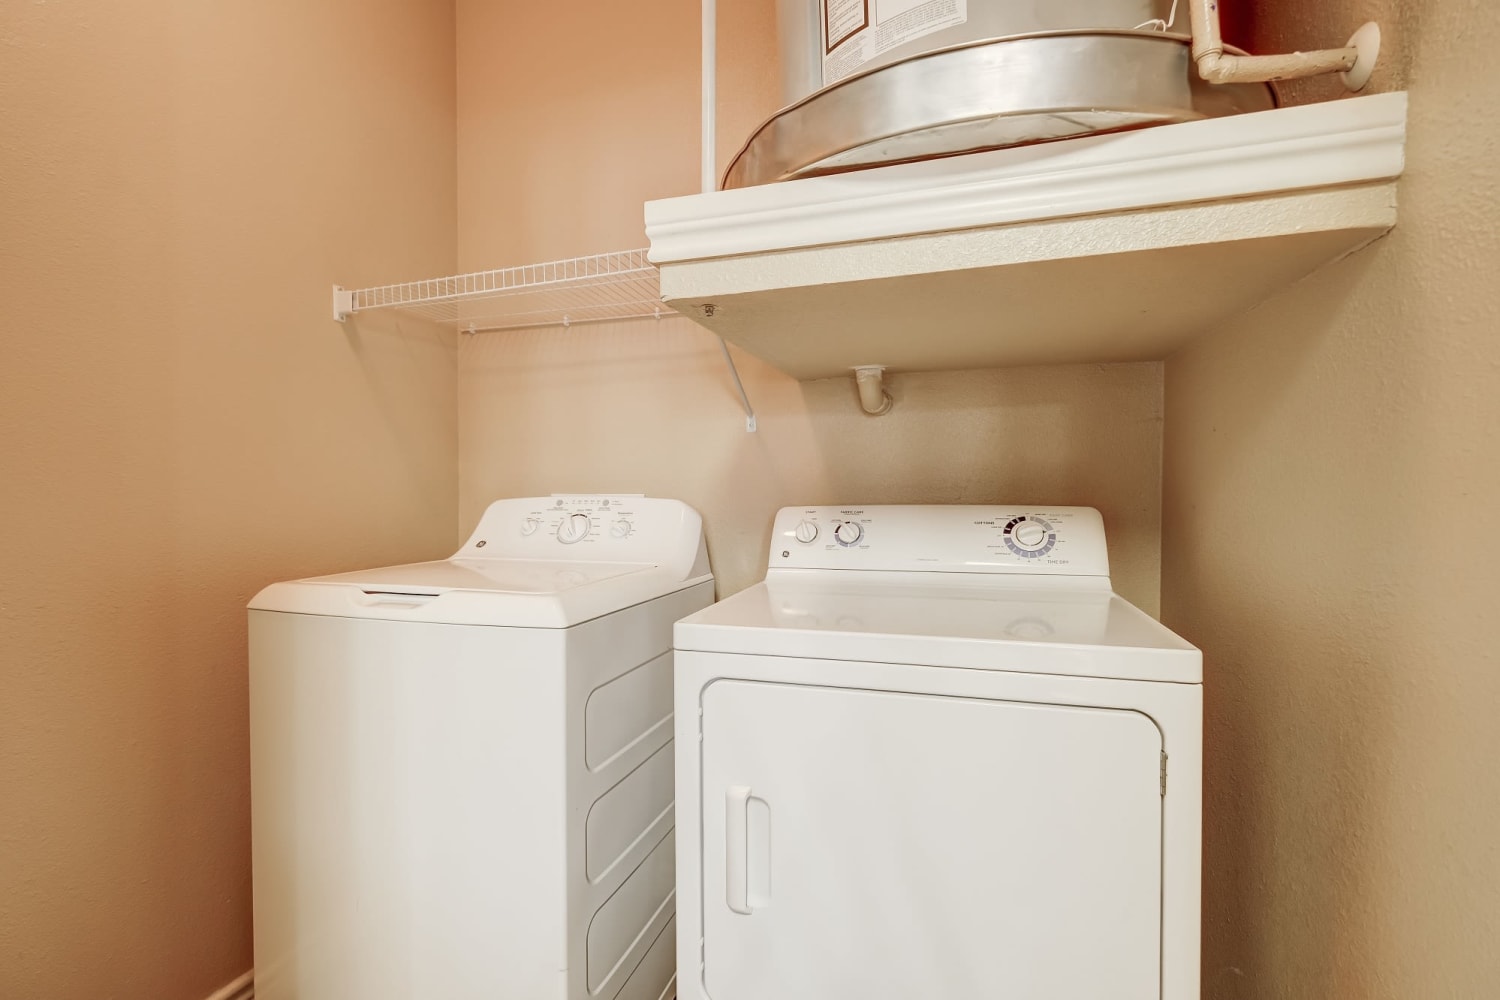 Washer and dryer at Chateau Mirage Apartment Homes in Lafayette, Louisiana